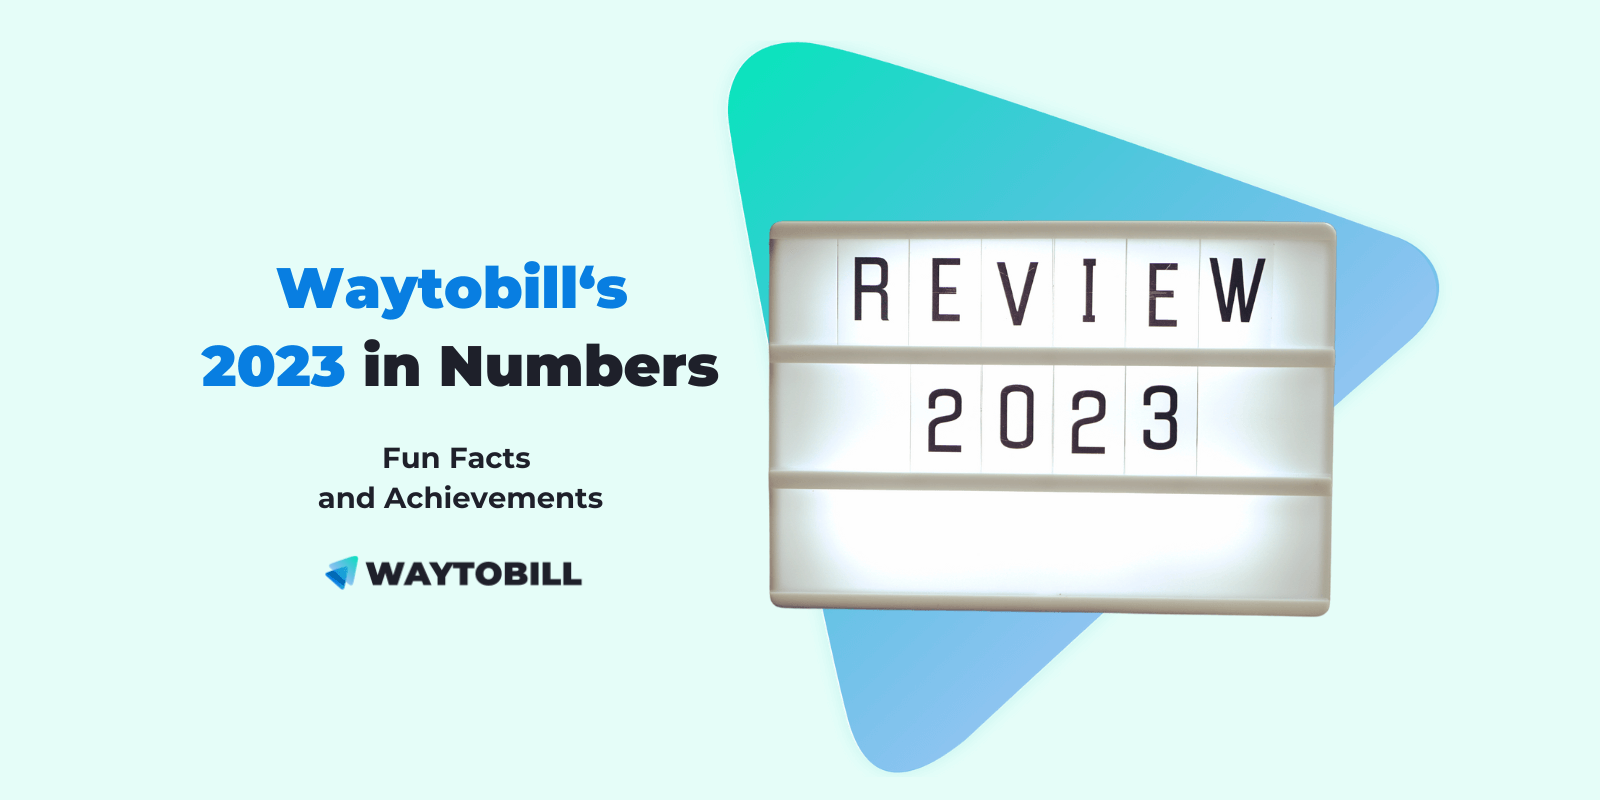 Waytobill’s 2023 in Numbers: A Year of Consistent Growth & Improvements